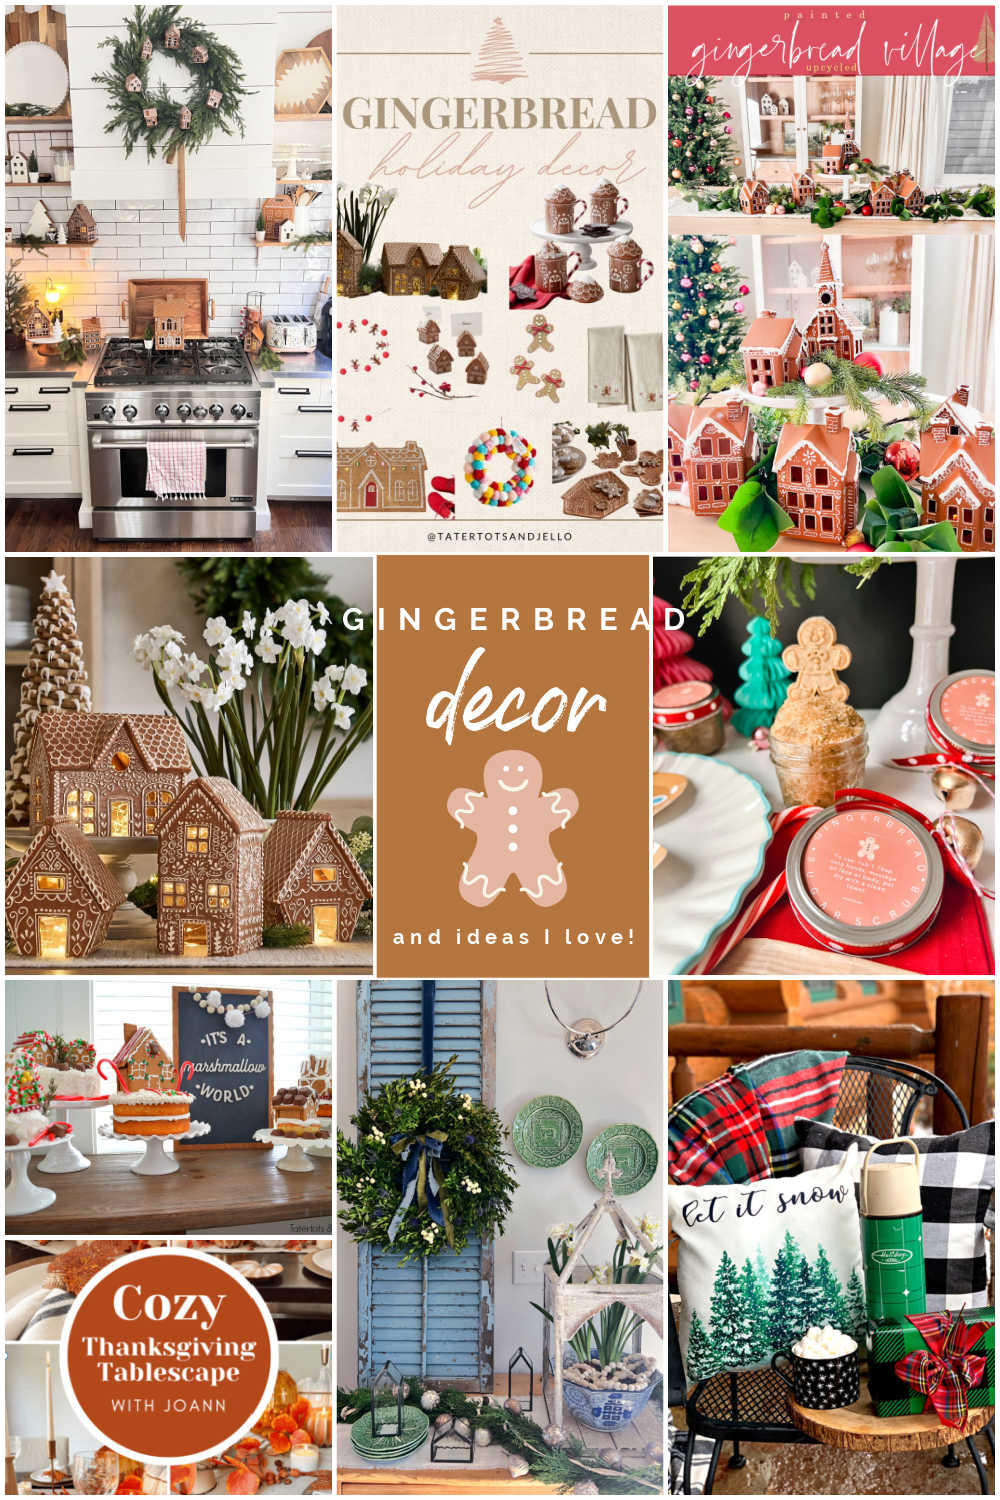 Sweetening the Season: Gingerbread Decor Ideas for a Festive Christmas. Ideas to make your holidays sweet!